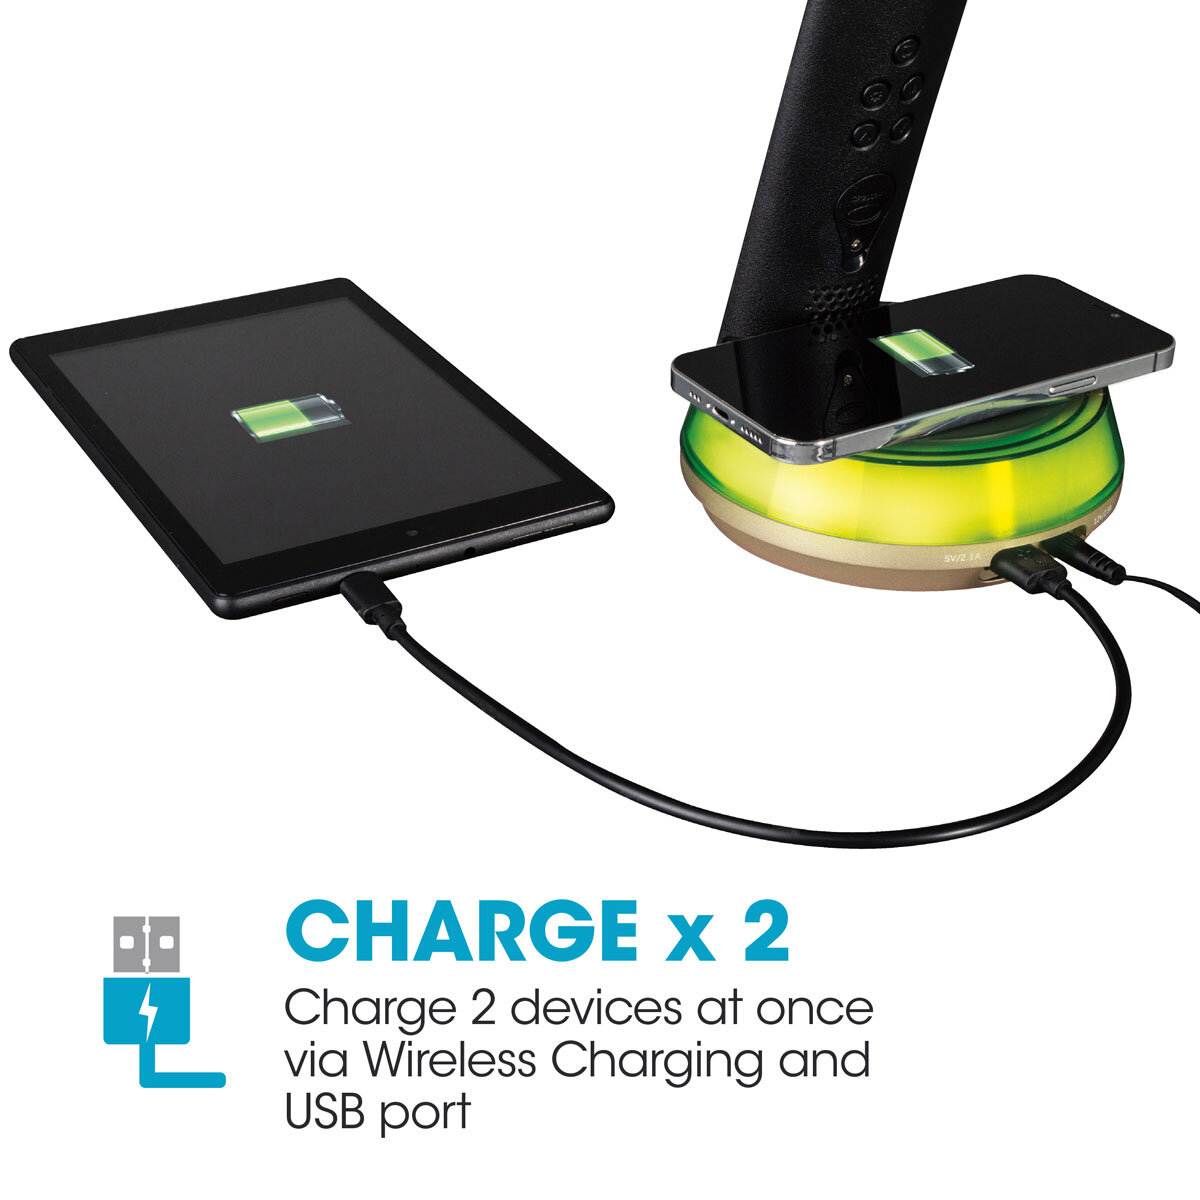 Buy Wireless charging LED Desk Lamp Base Black Feature6 Image at Costco.co.uk